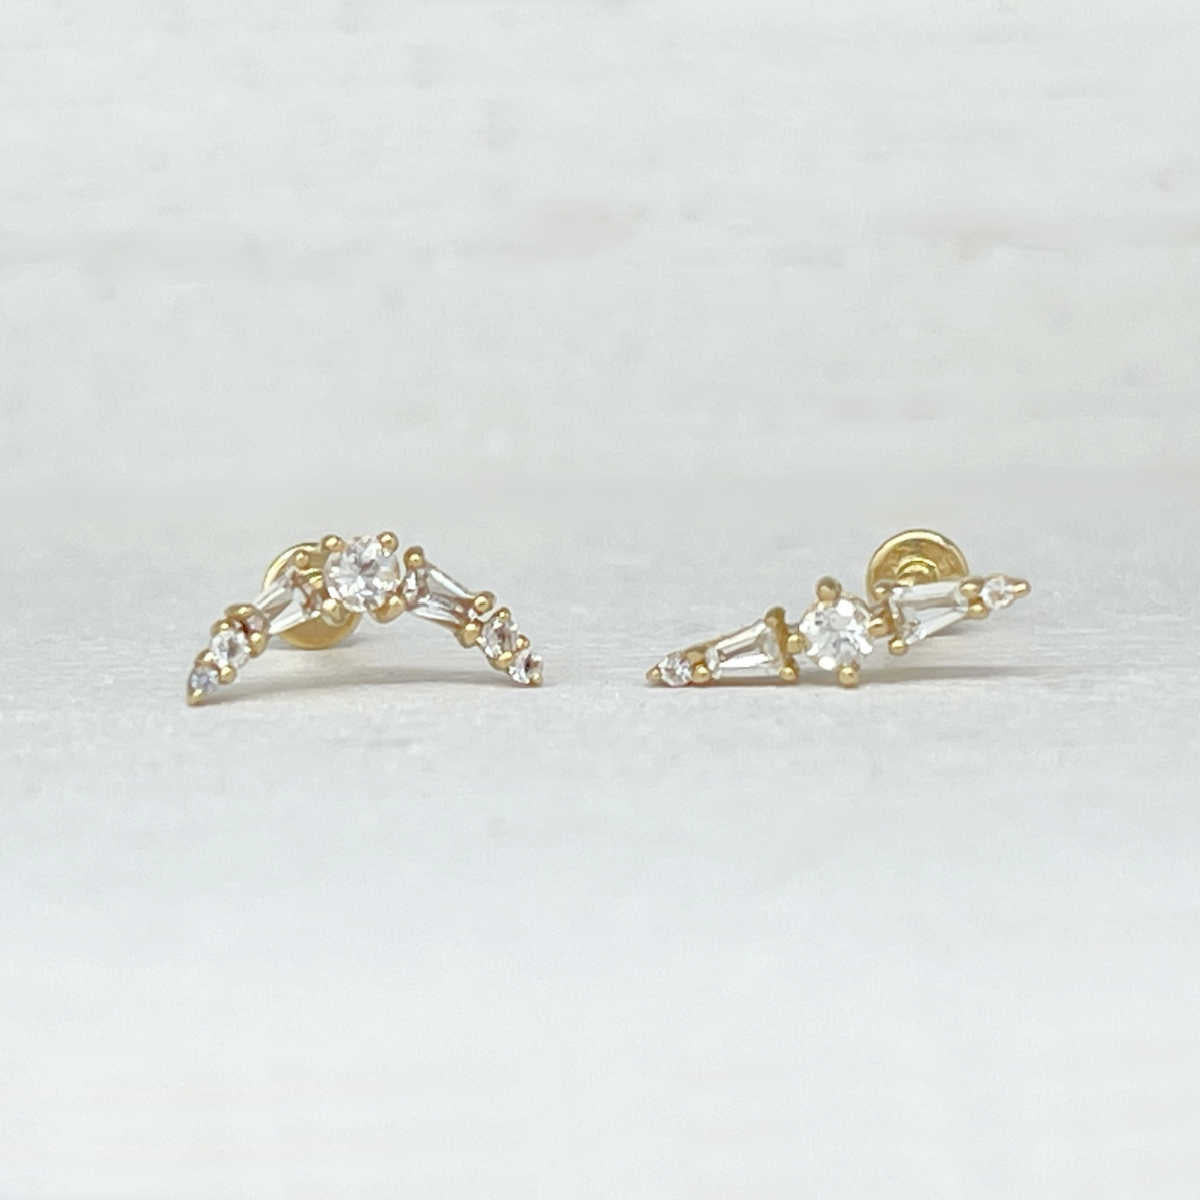 Gemstone Spike & Moon Helix Earrings | 14K Gold Flat Back Cartilage Piercing Studs from Two of Most